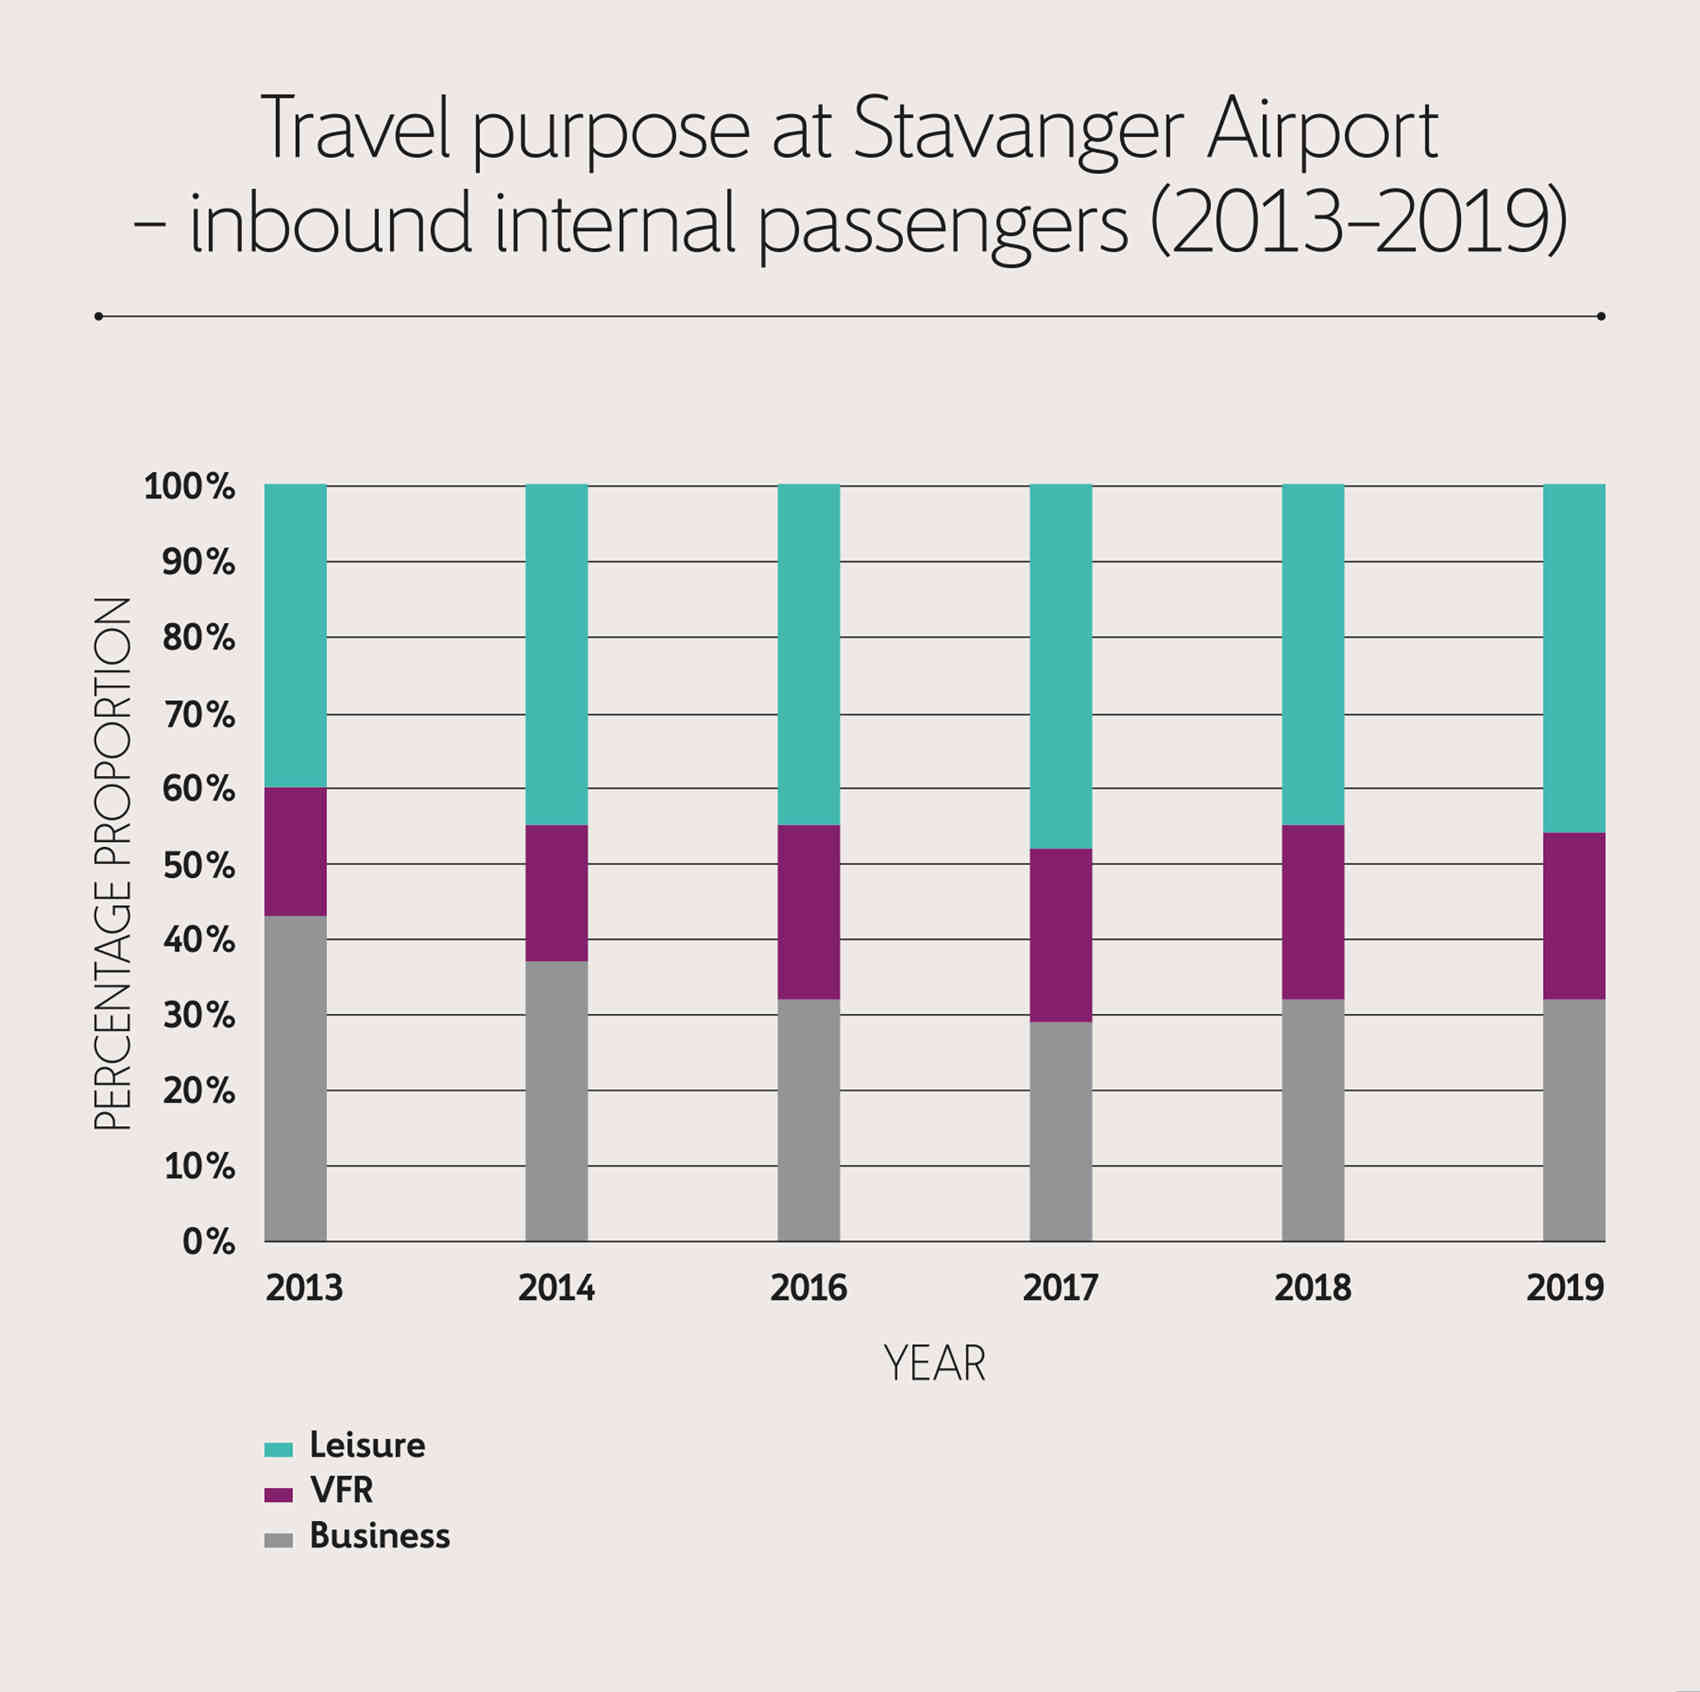 In 2019, leisure travel made up more than 45% of inbound internal passengers to Stavanger. Business travel amounted to more than 30%, while VFR travel made up approximately 25%.